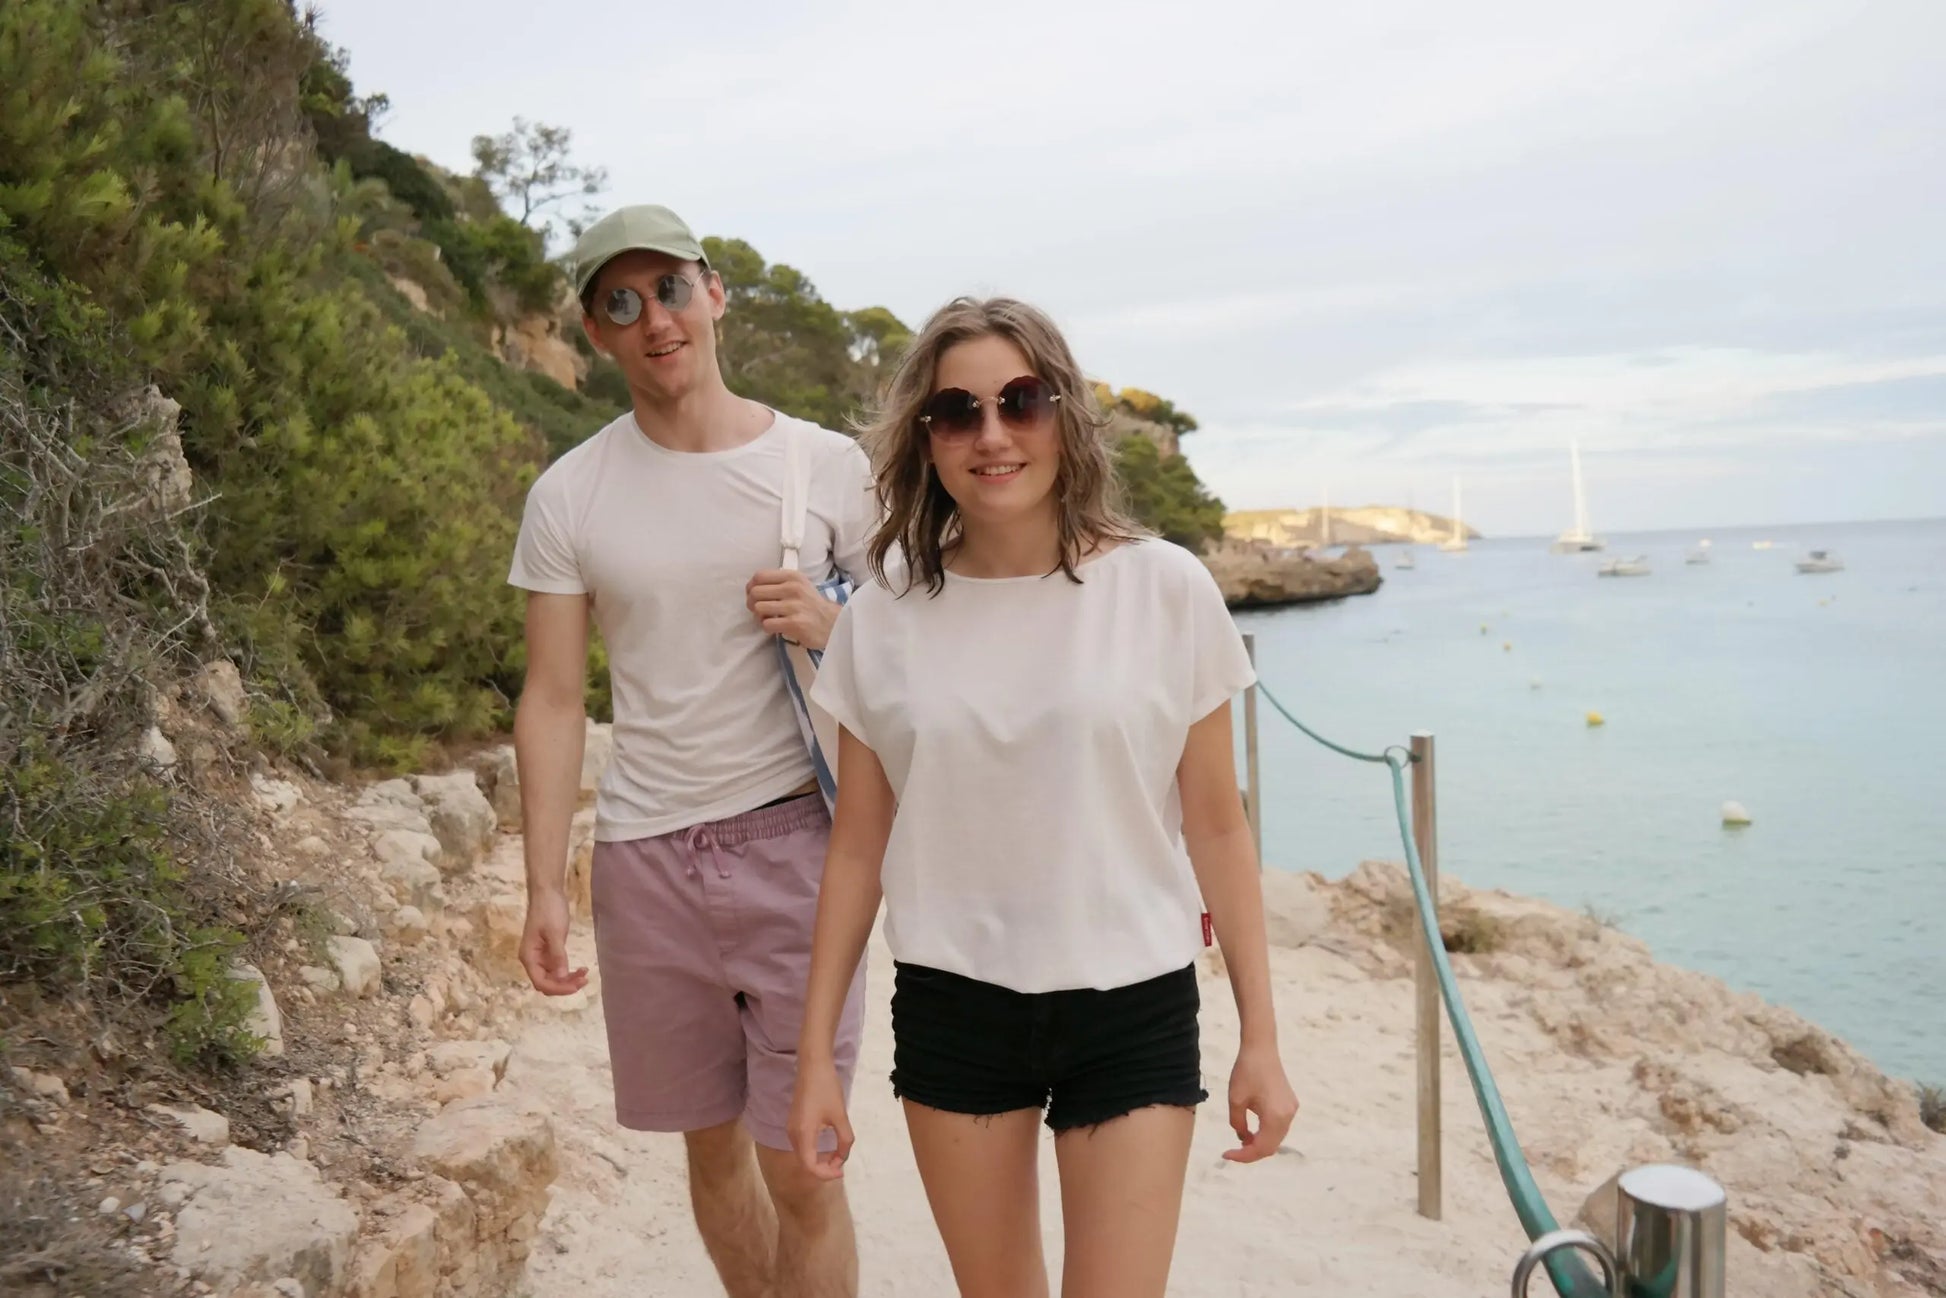 A man and woman in white shirts walk near water, showcasing the Tan-Through T-Shirt - White for outdoor activities. The fabric allows healthy tanning with UVA ray penetration. Sizes XS-XXL available.